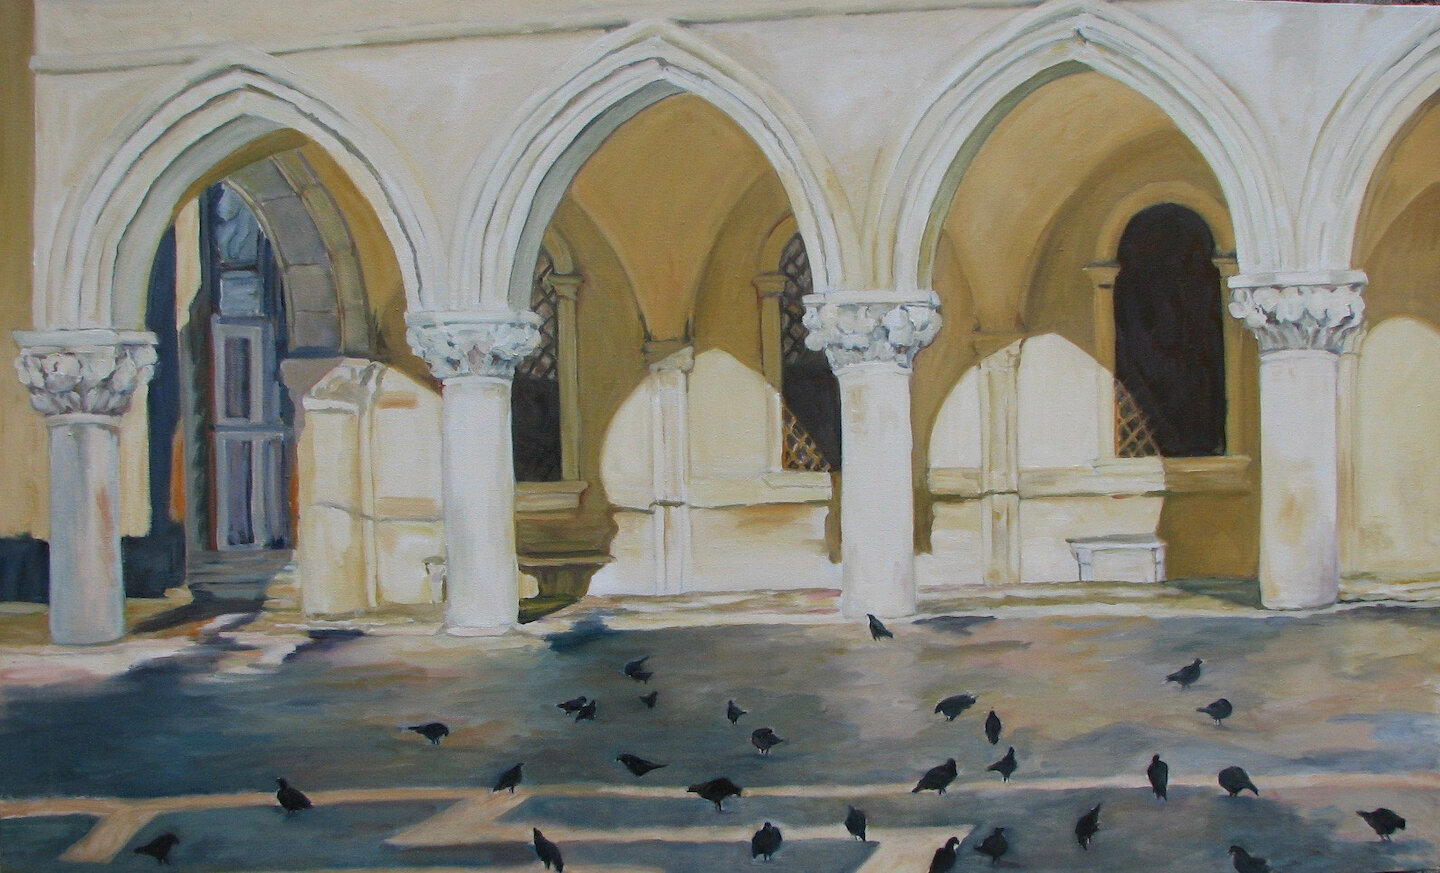    Pigeons at the Palace  , 30” x 48”, oil on canvas 